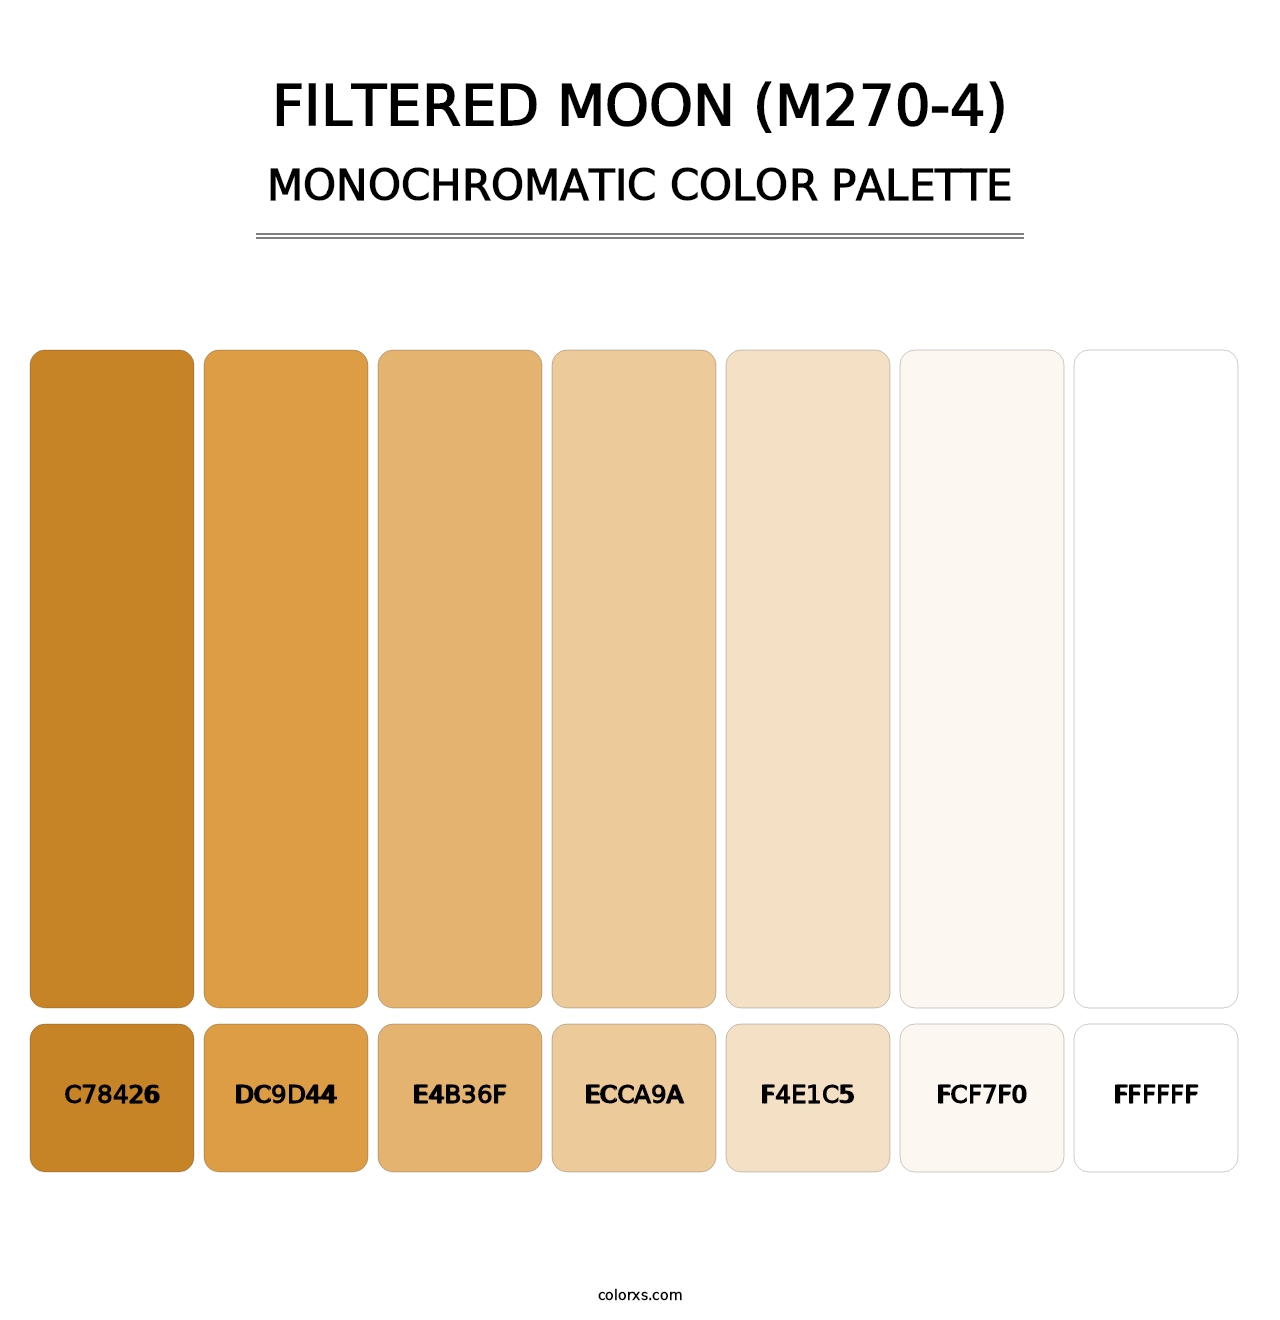 Filtered Moon (M270-4) - Monochromatic Color Palette